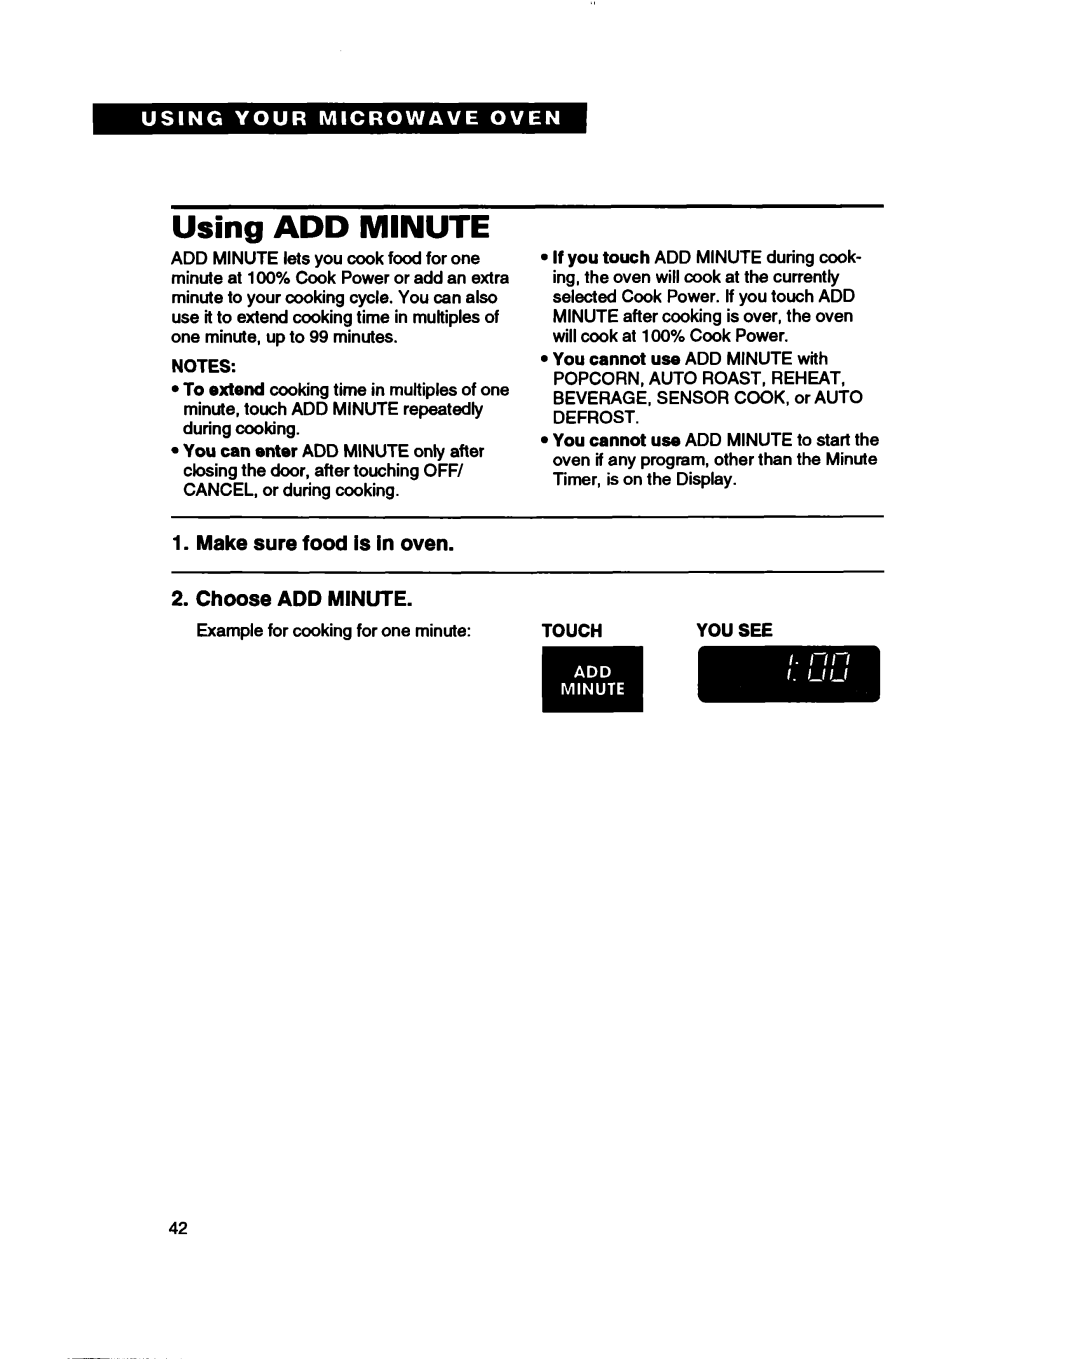 Whirlpool MH7115XB warranty Using ADD MINUTE, Make sure food is in oven 2.Choose ADD MINUTE, Touch 